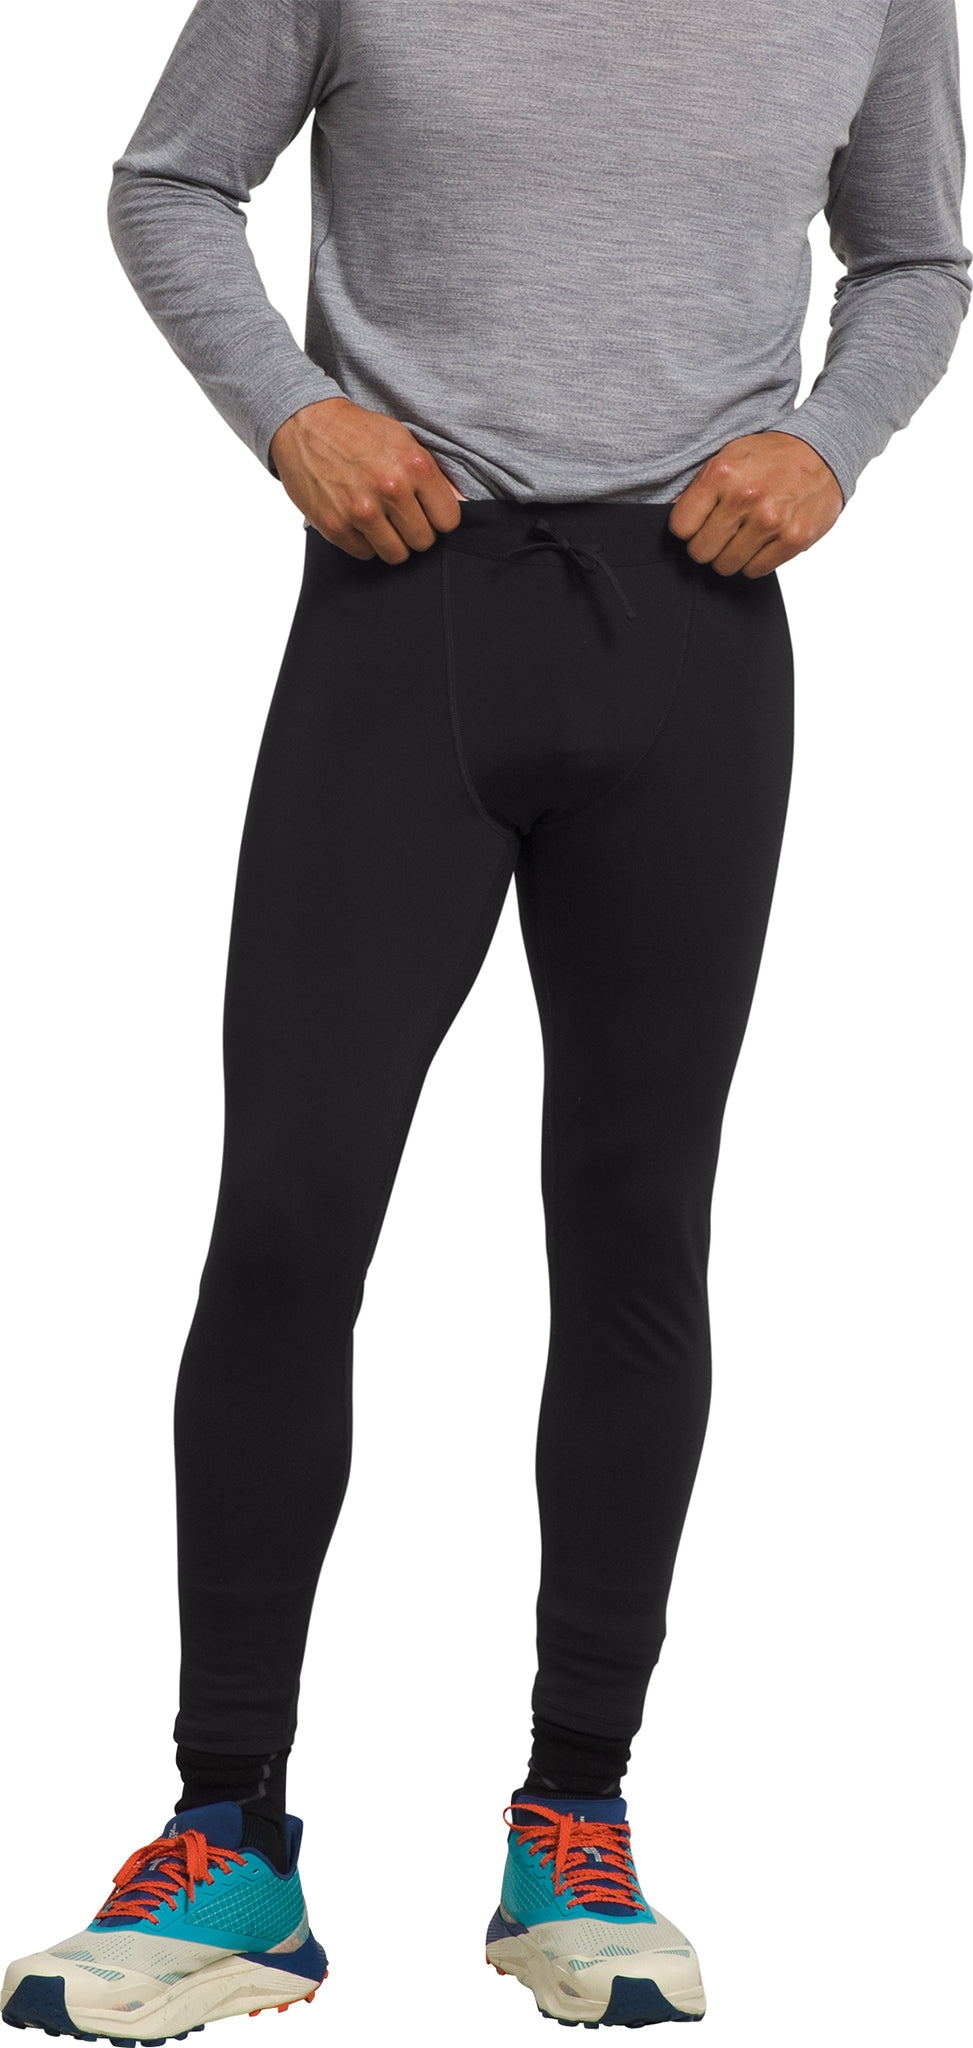 Women's Winter Warm Pro Tights | The North Face